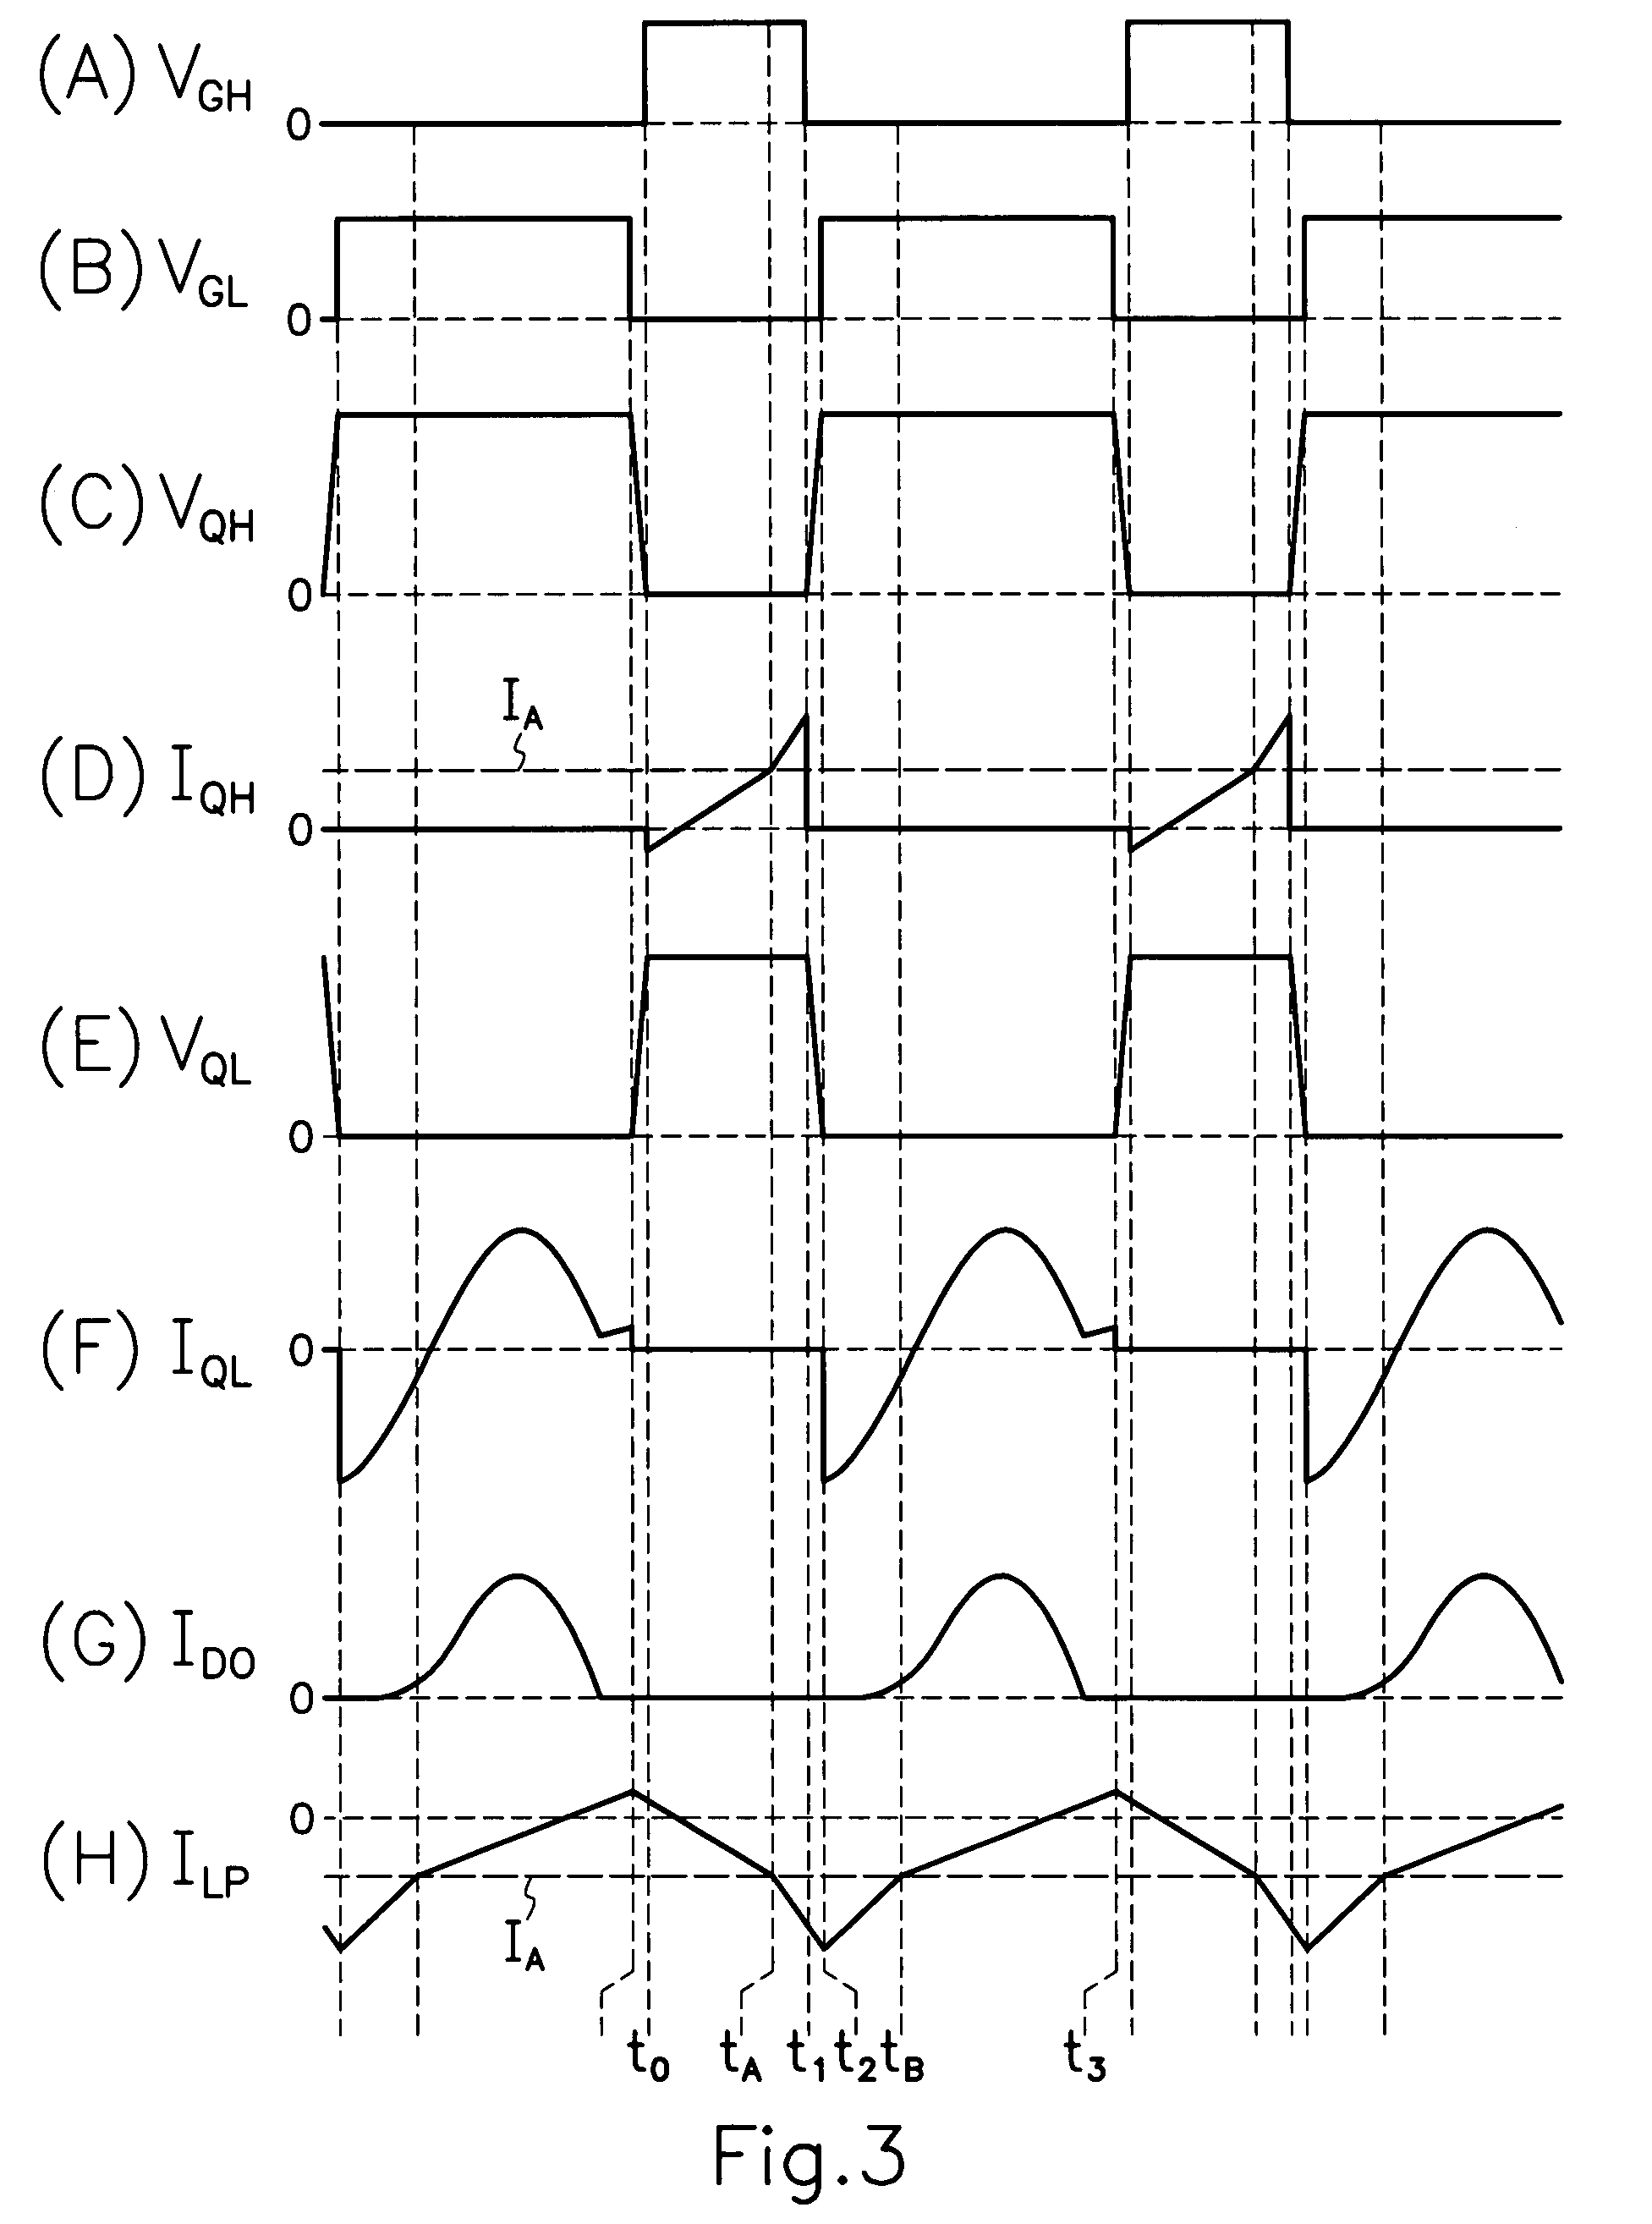 Resonant switching power source having first and second switching elements connected in series to a DC power source